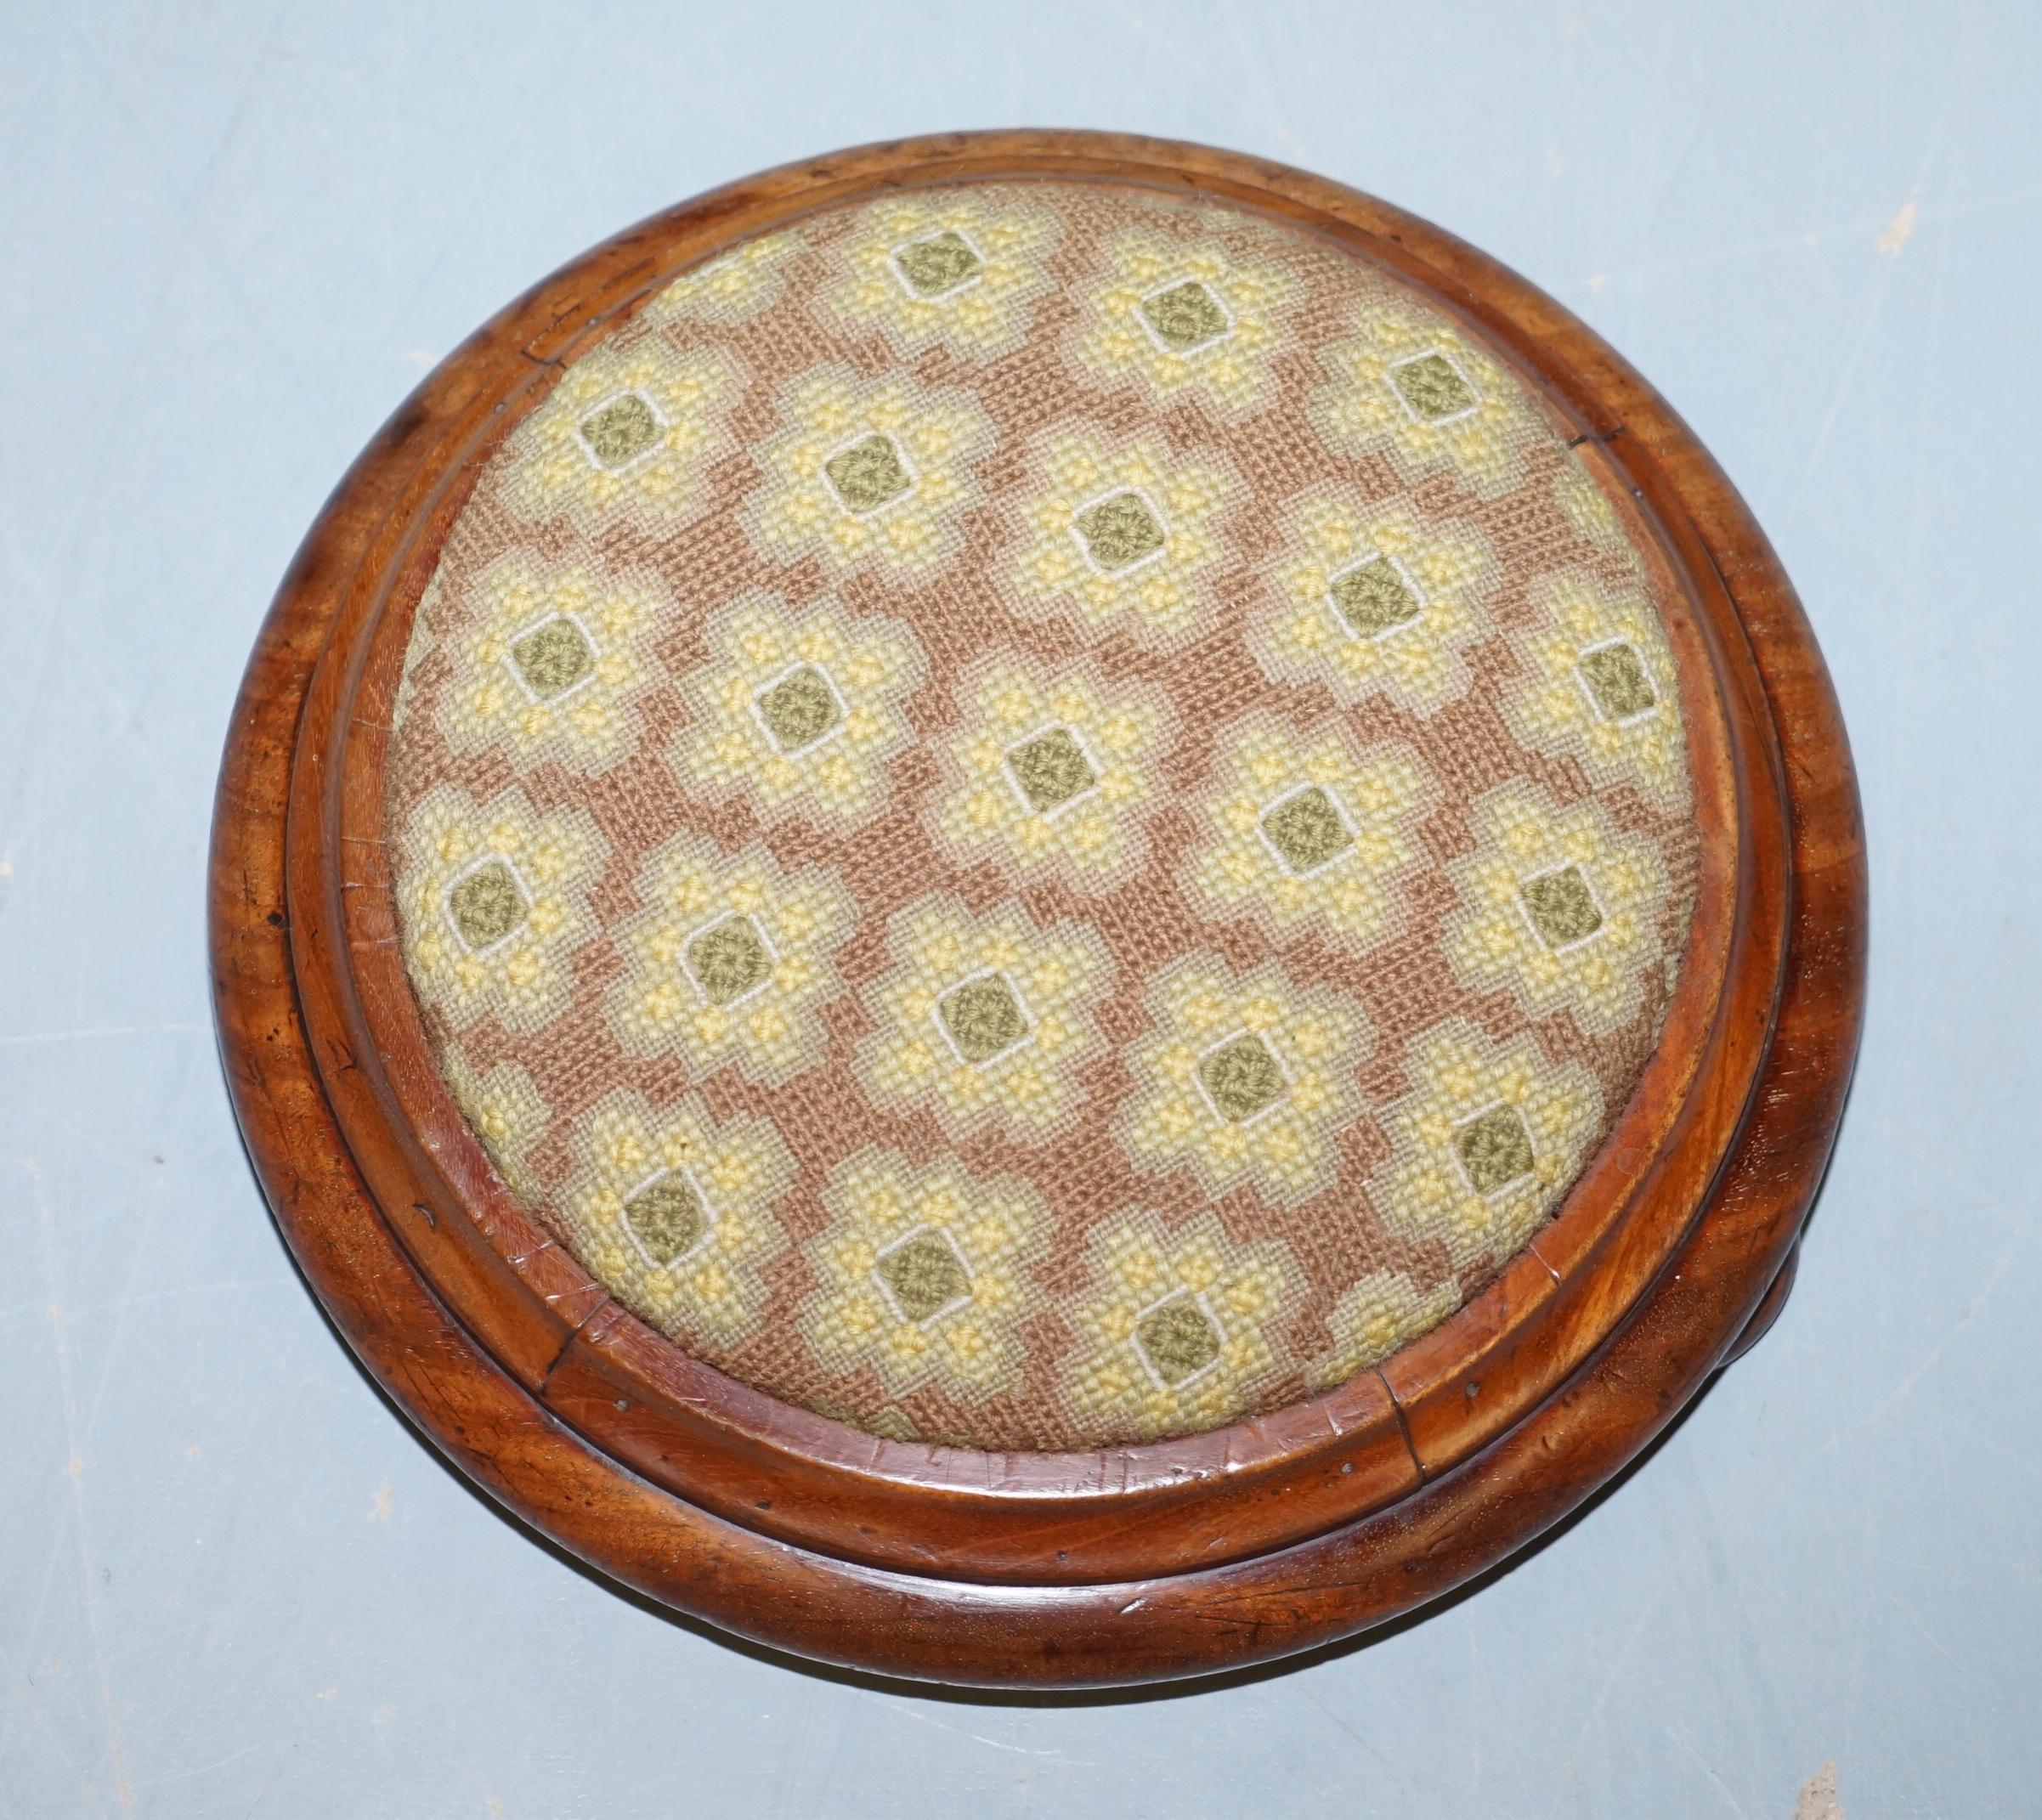 We are delighted to offer this lovely small Georgian Walnut round footstool

A very nicely made traditional Georgian stool, the frame is walnut, the upholstery is Victorian I think and in good order

We have cleaned waxed and polished the